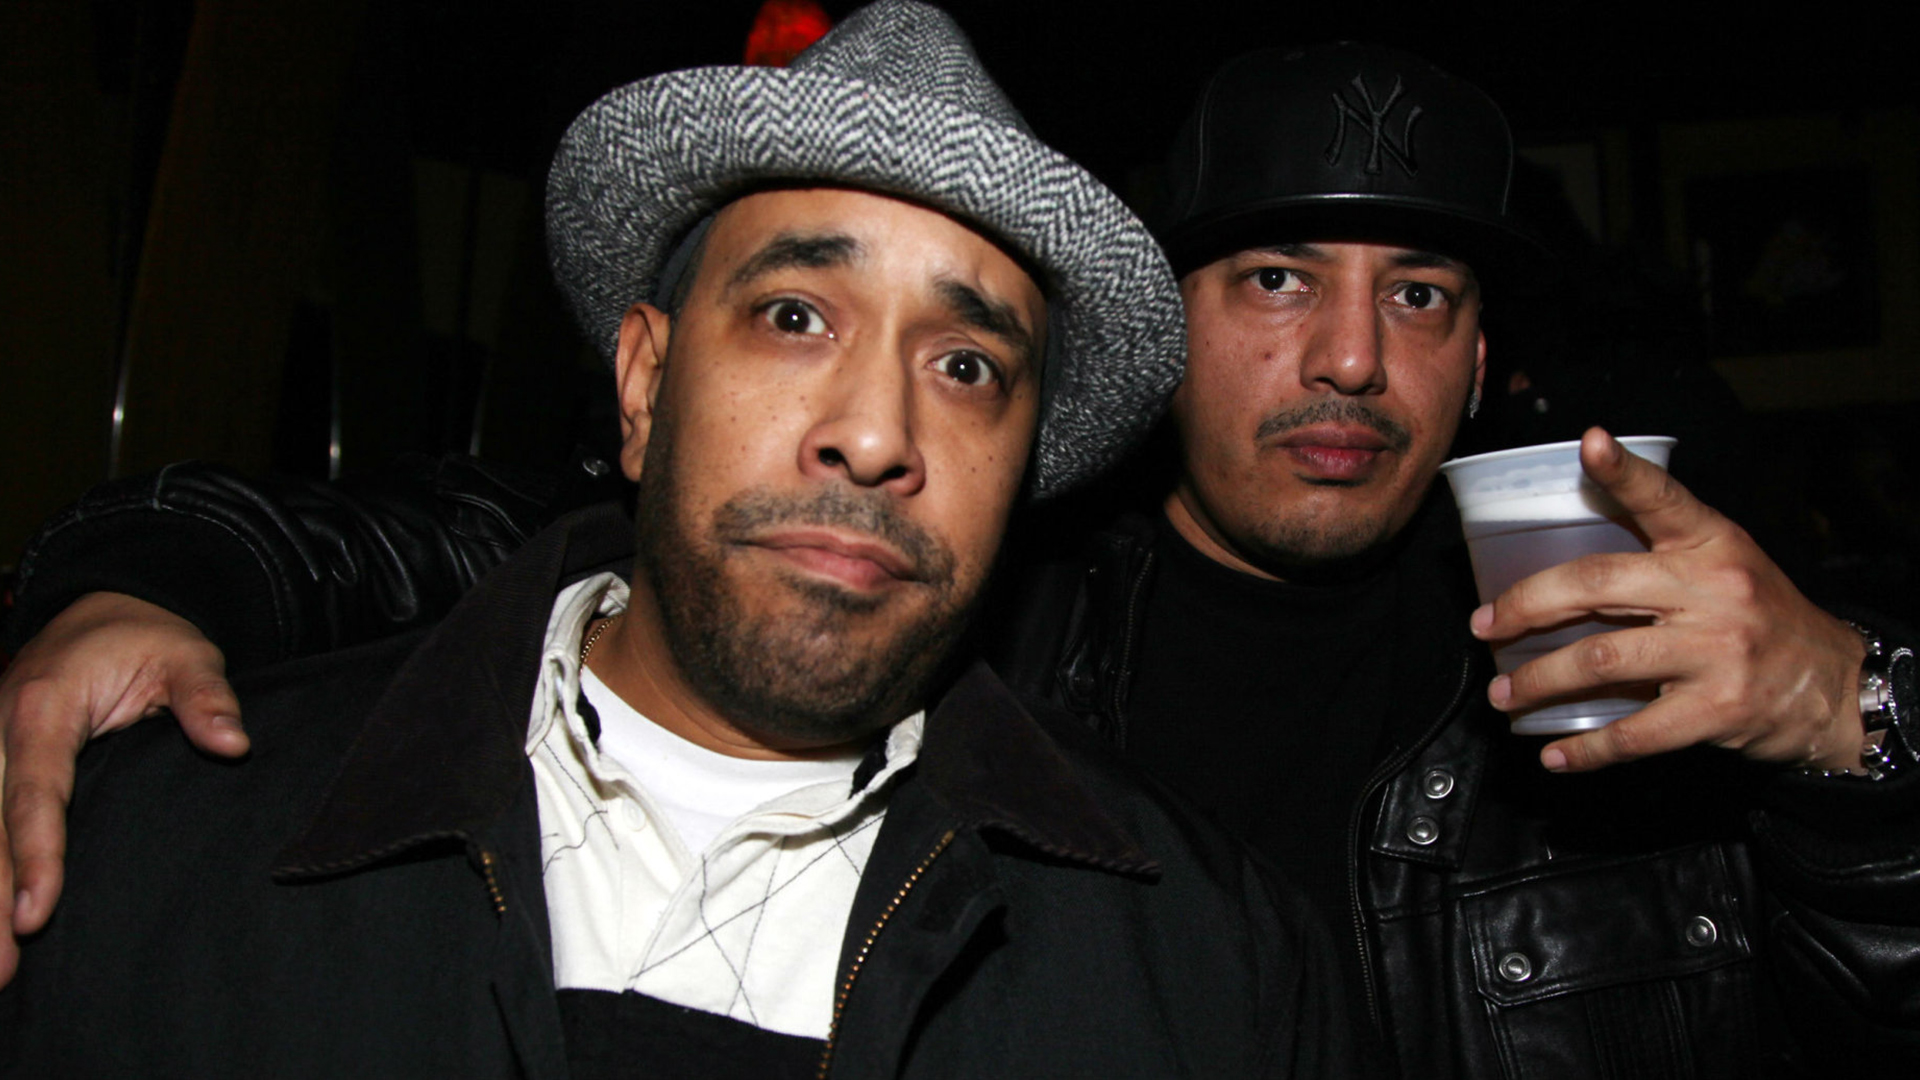 Watch Out Now av The Beatnuts